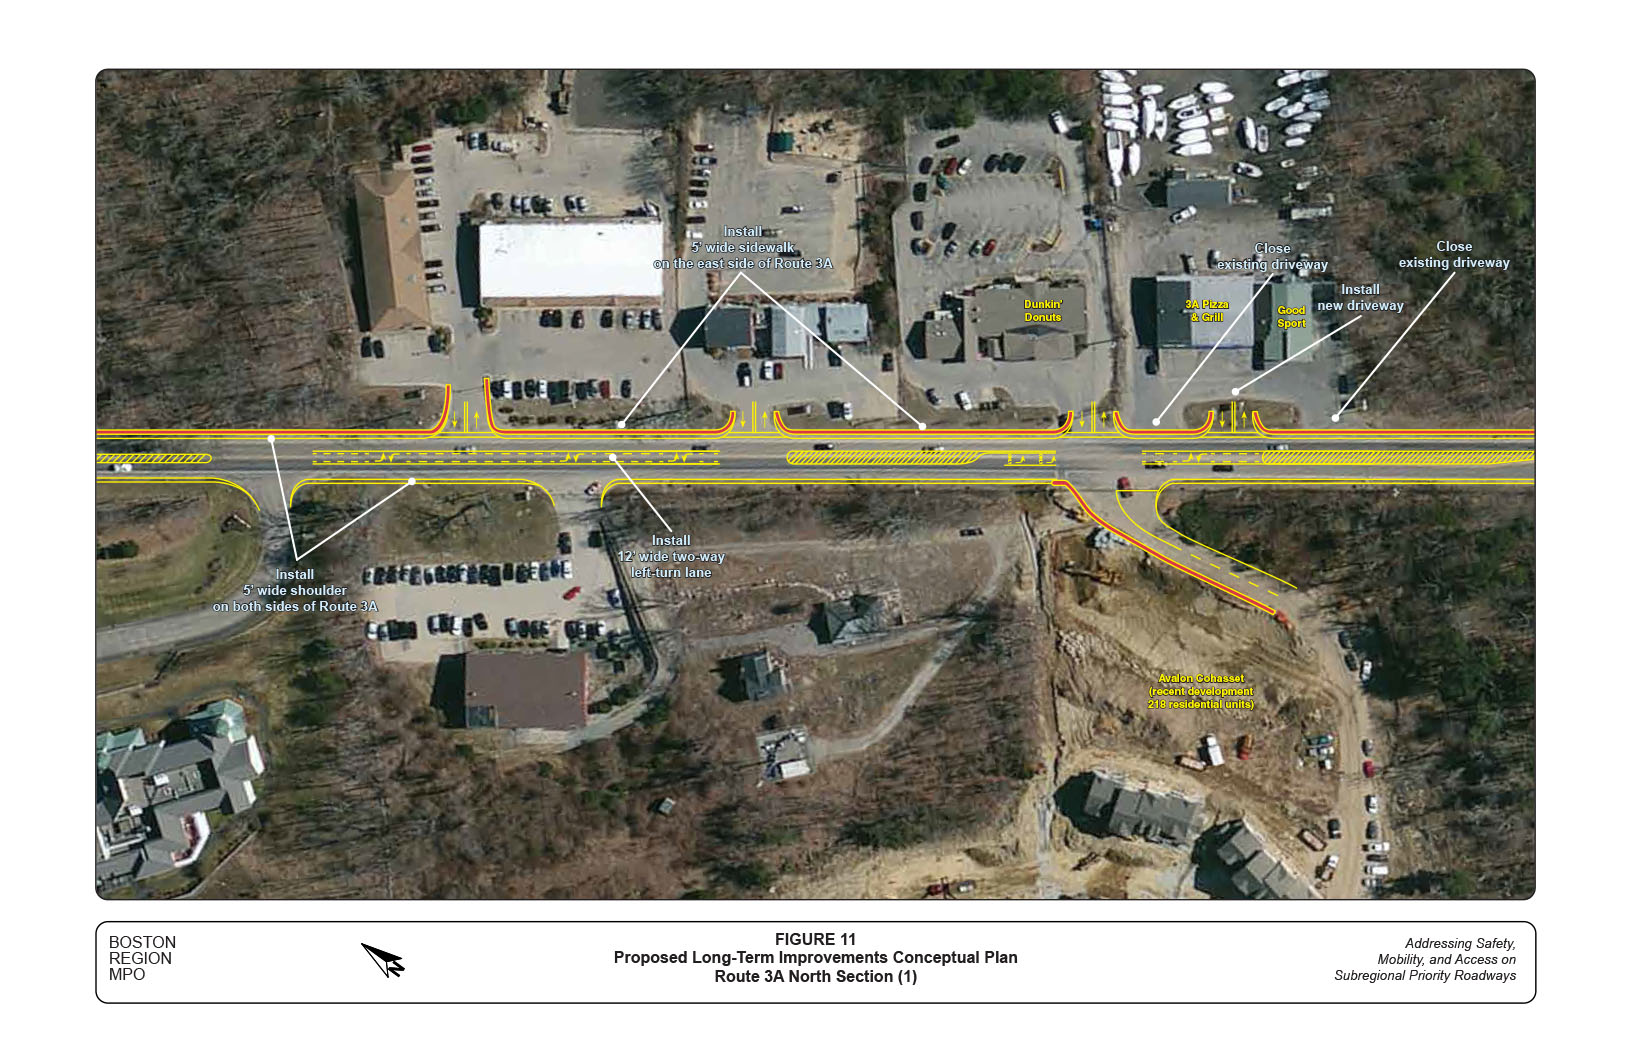 FIGURE 11 is an aerial view map that depicts the proposed long-term improvements (conceptual plan) for the north section of Route 3A.